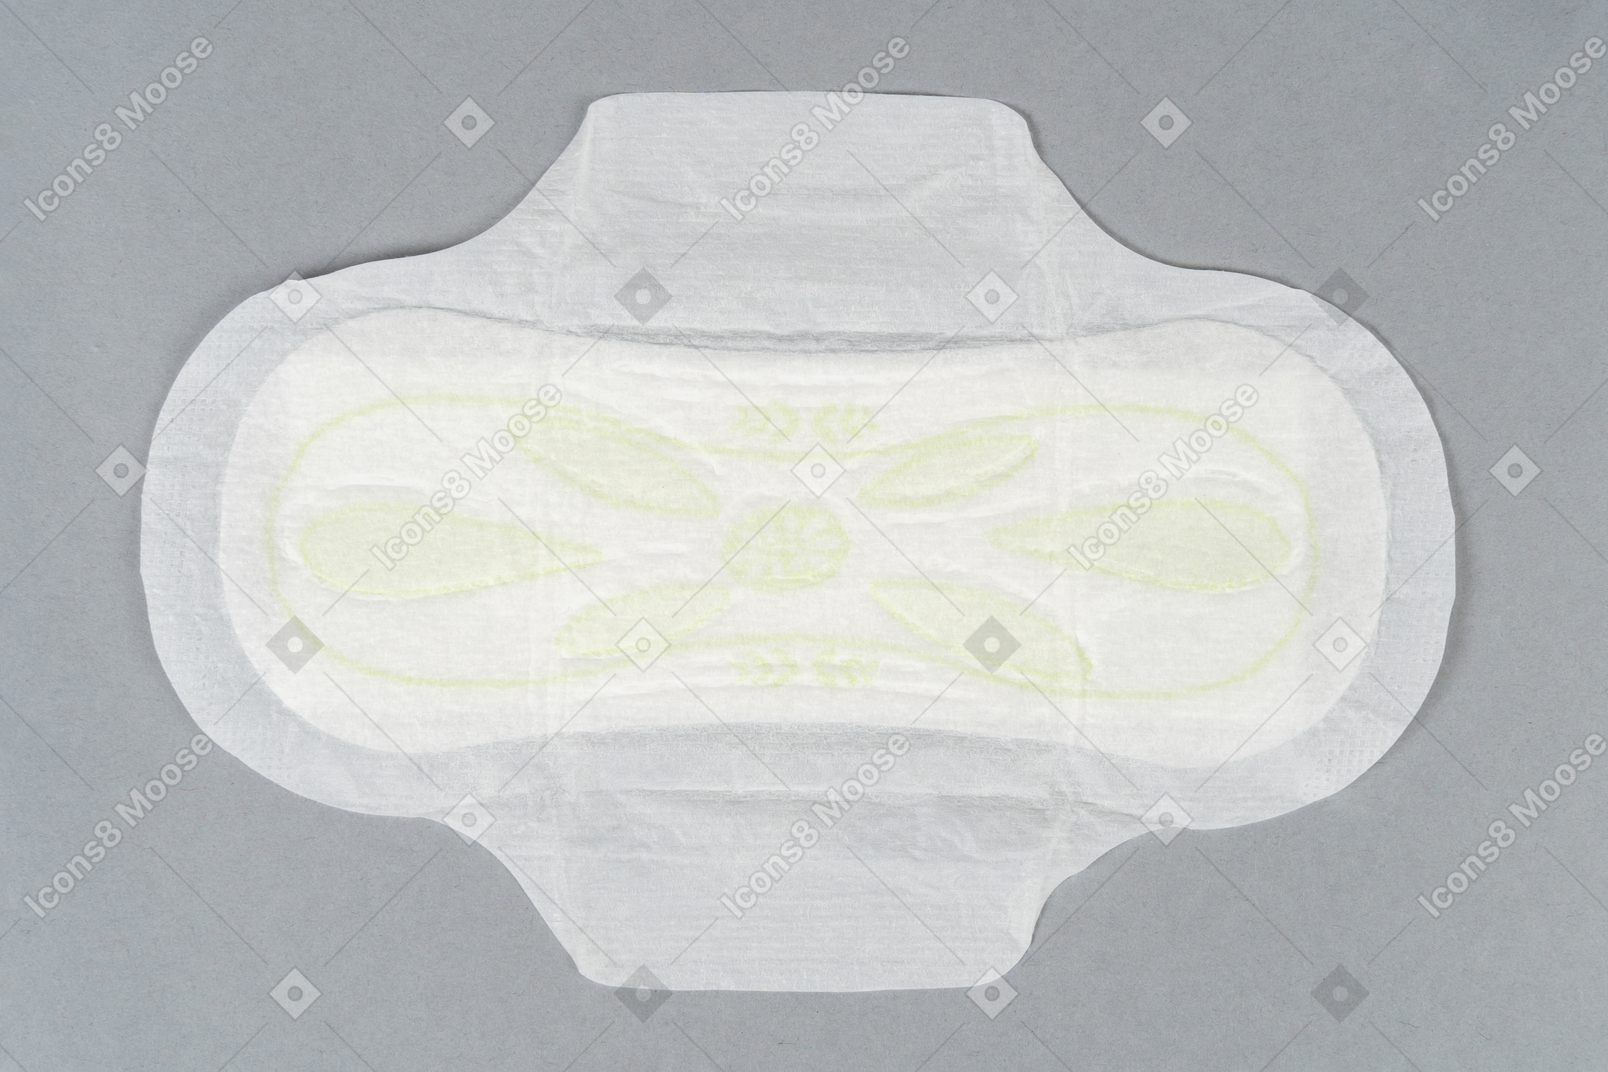 Sanitary pad with wings over gray background